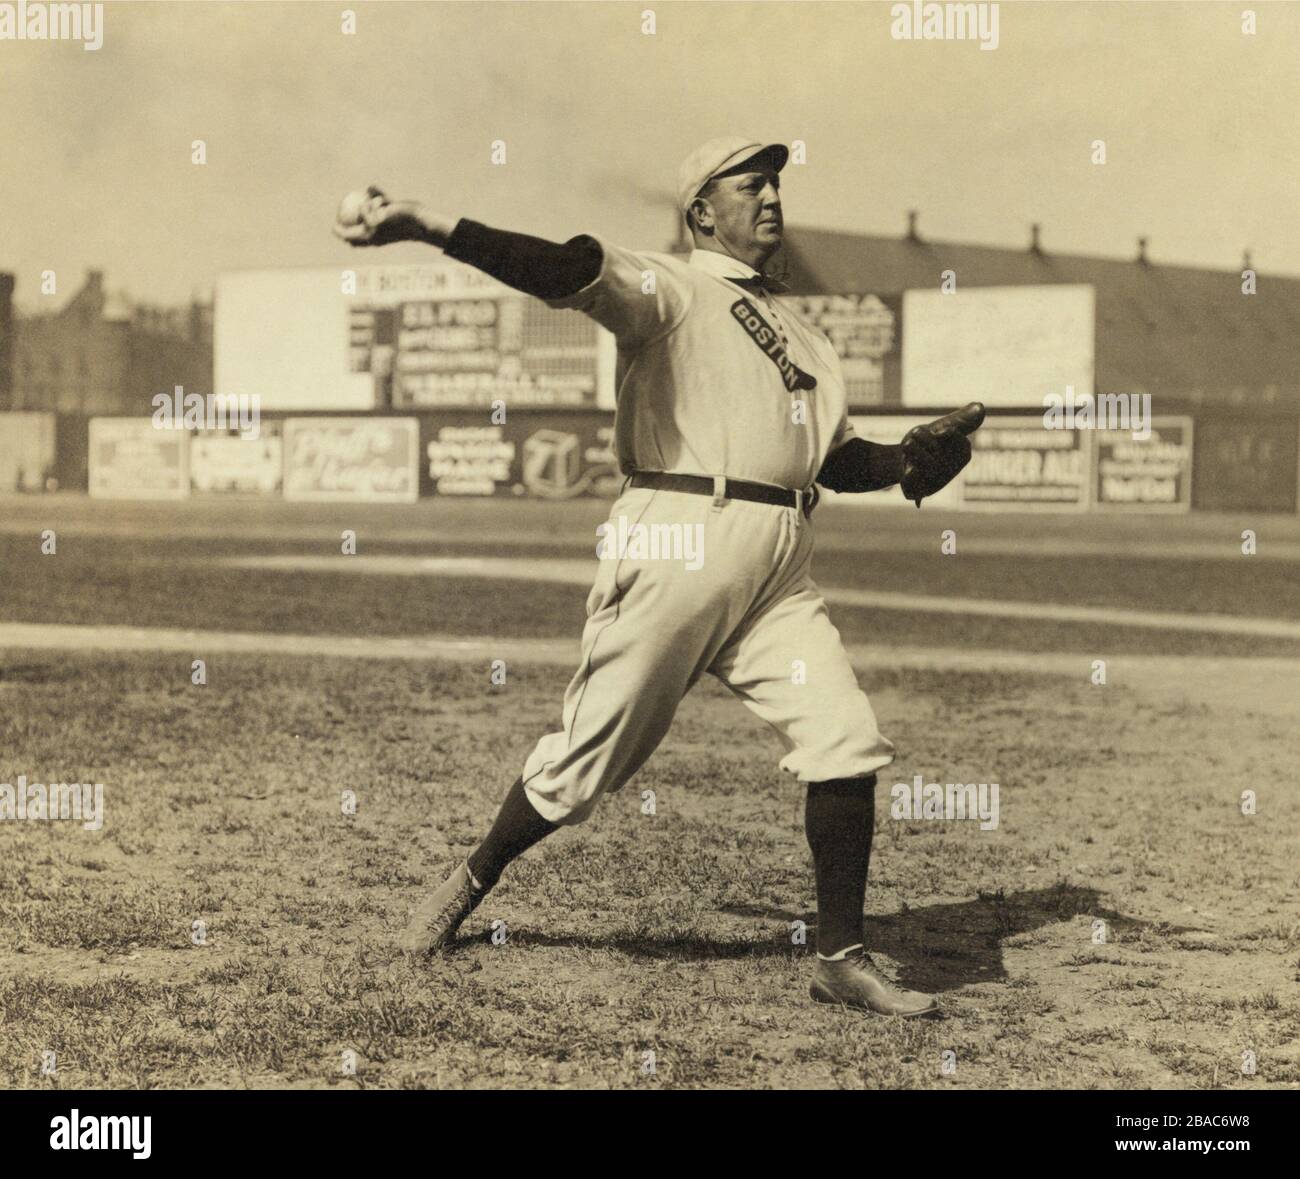 Cy Young pitching in 1908 in New York City, where his team played the Yankees. Young was then playing on the American League team, Boston Red Soxs (1901-1911)  (BSLOC 2018 3 110) Stock Photo